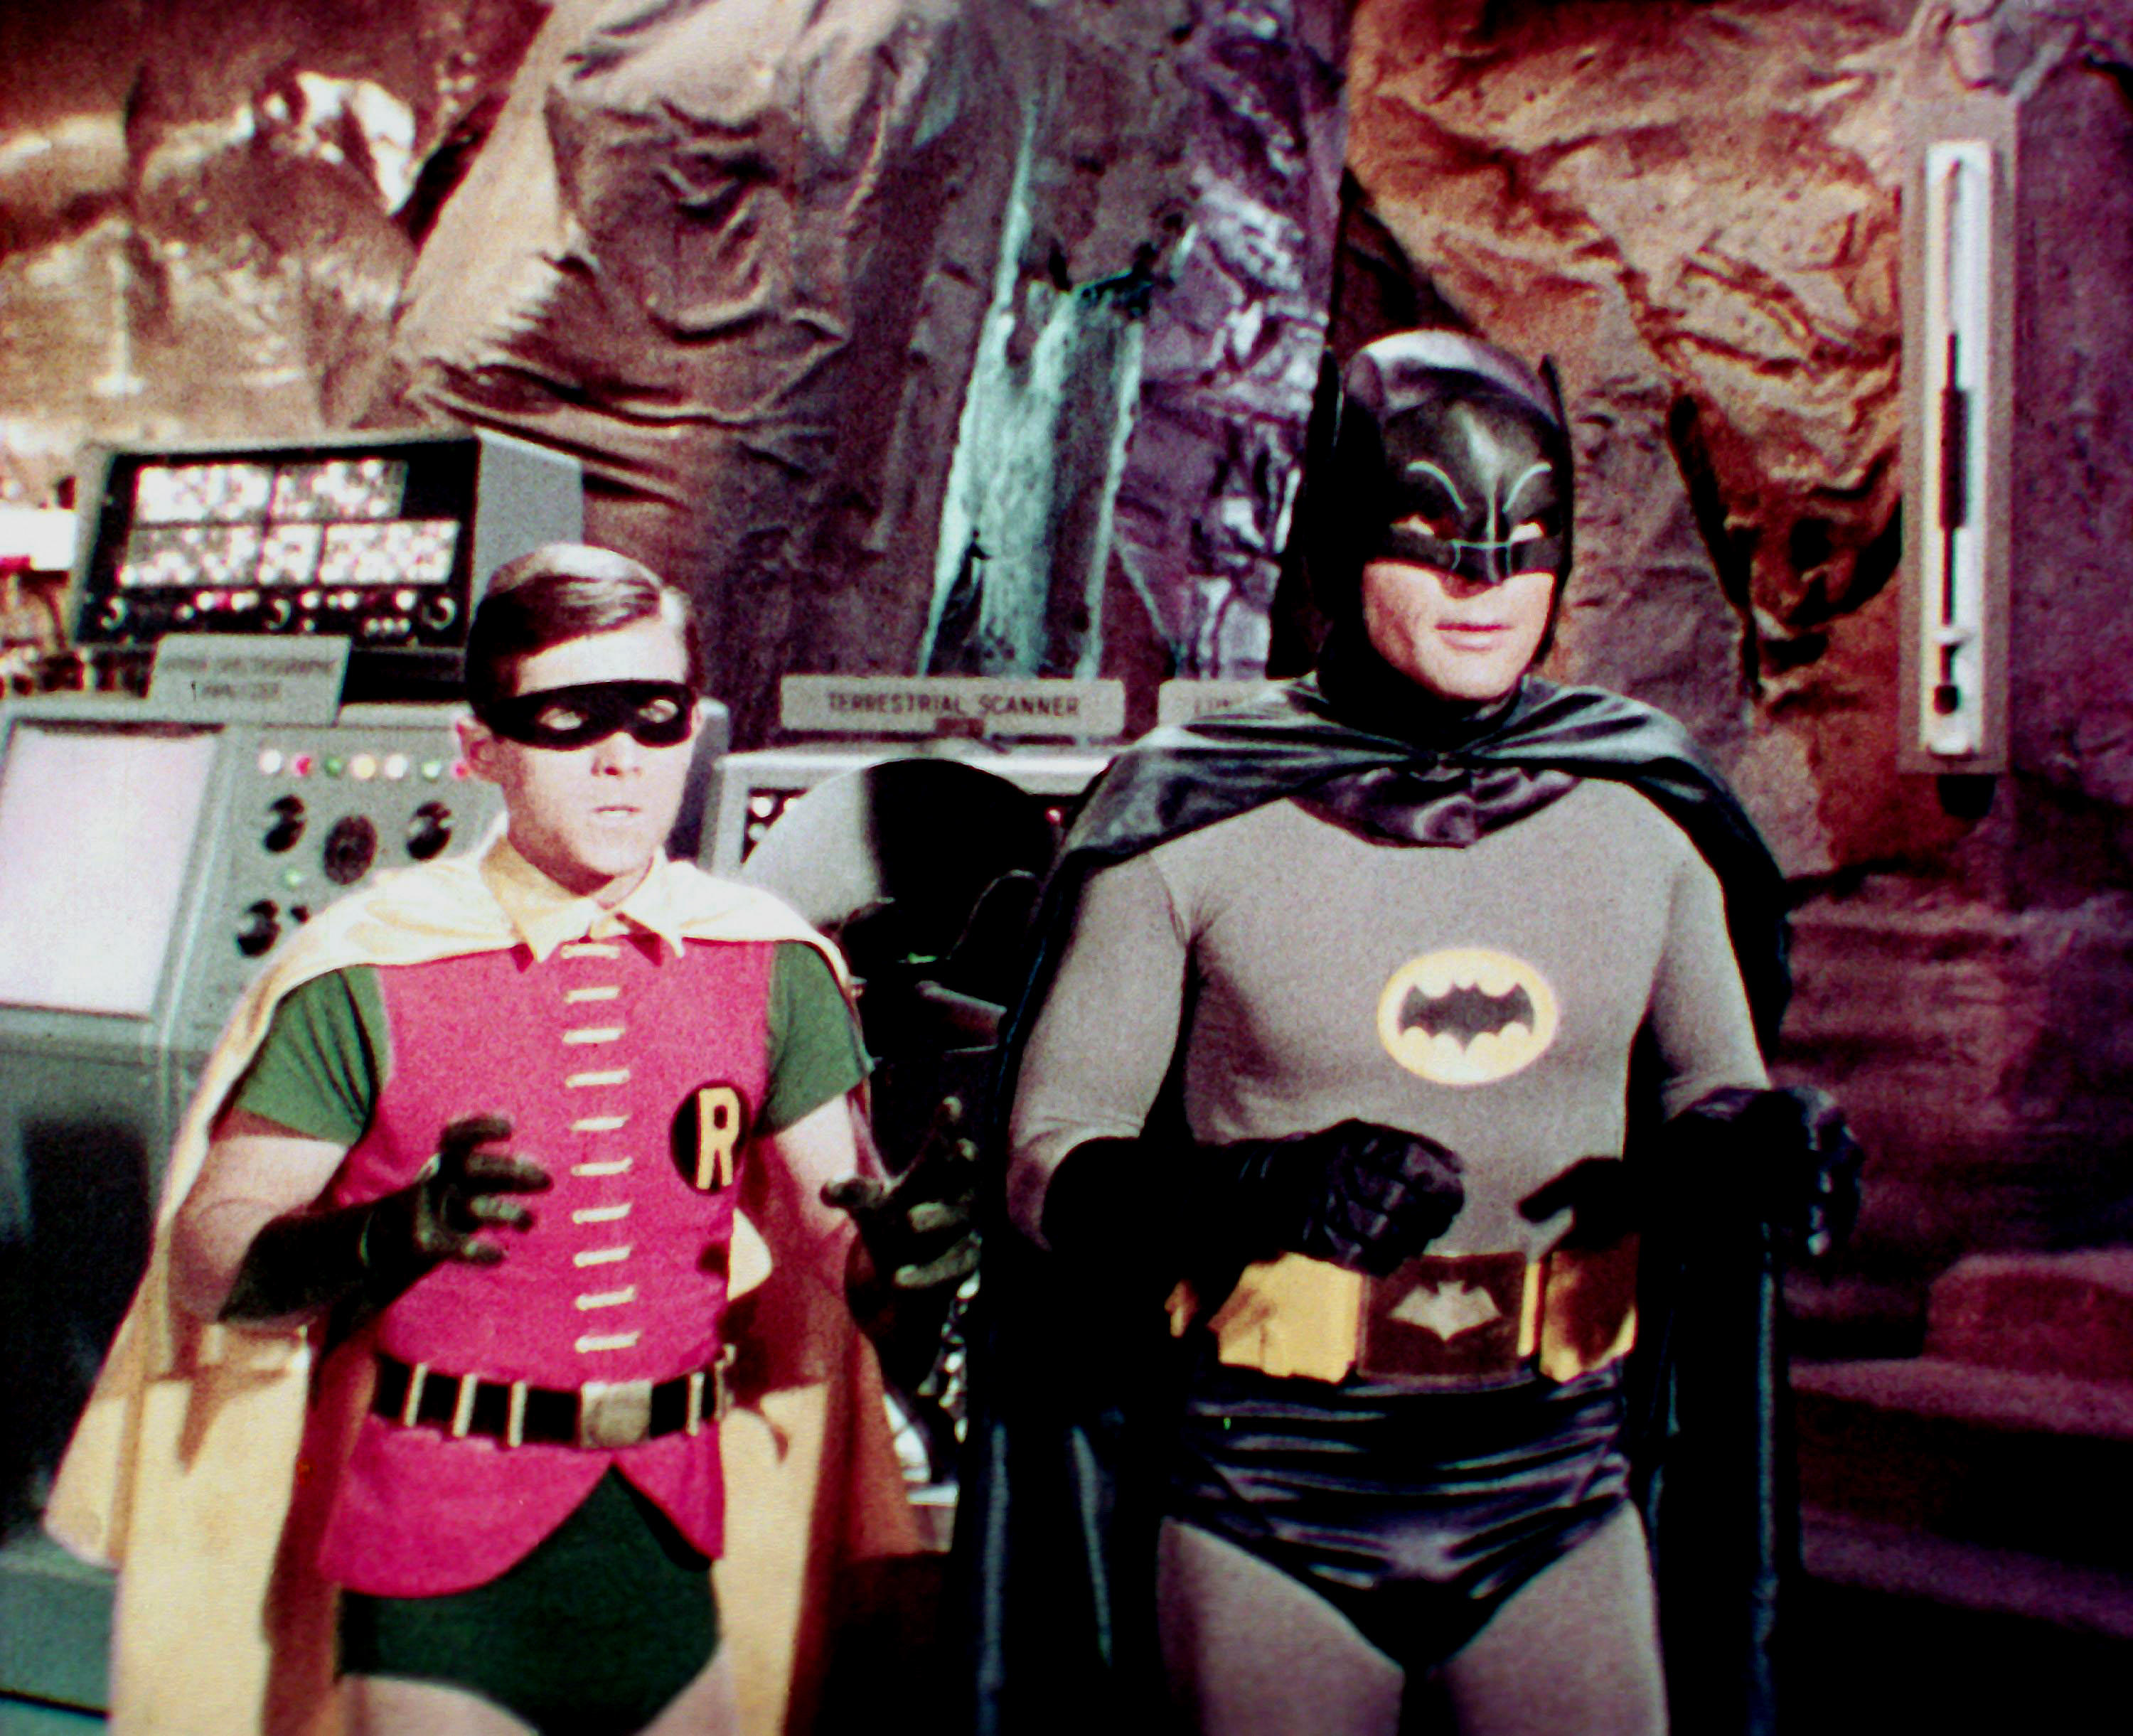 This classic version of Batman never goes out of style.